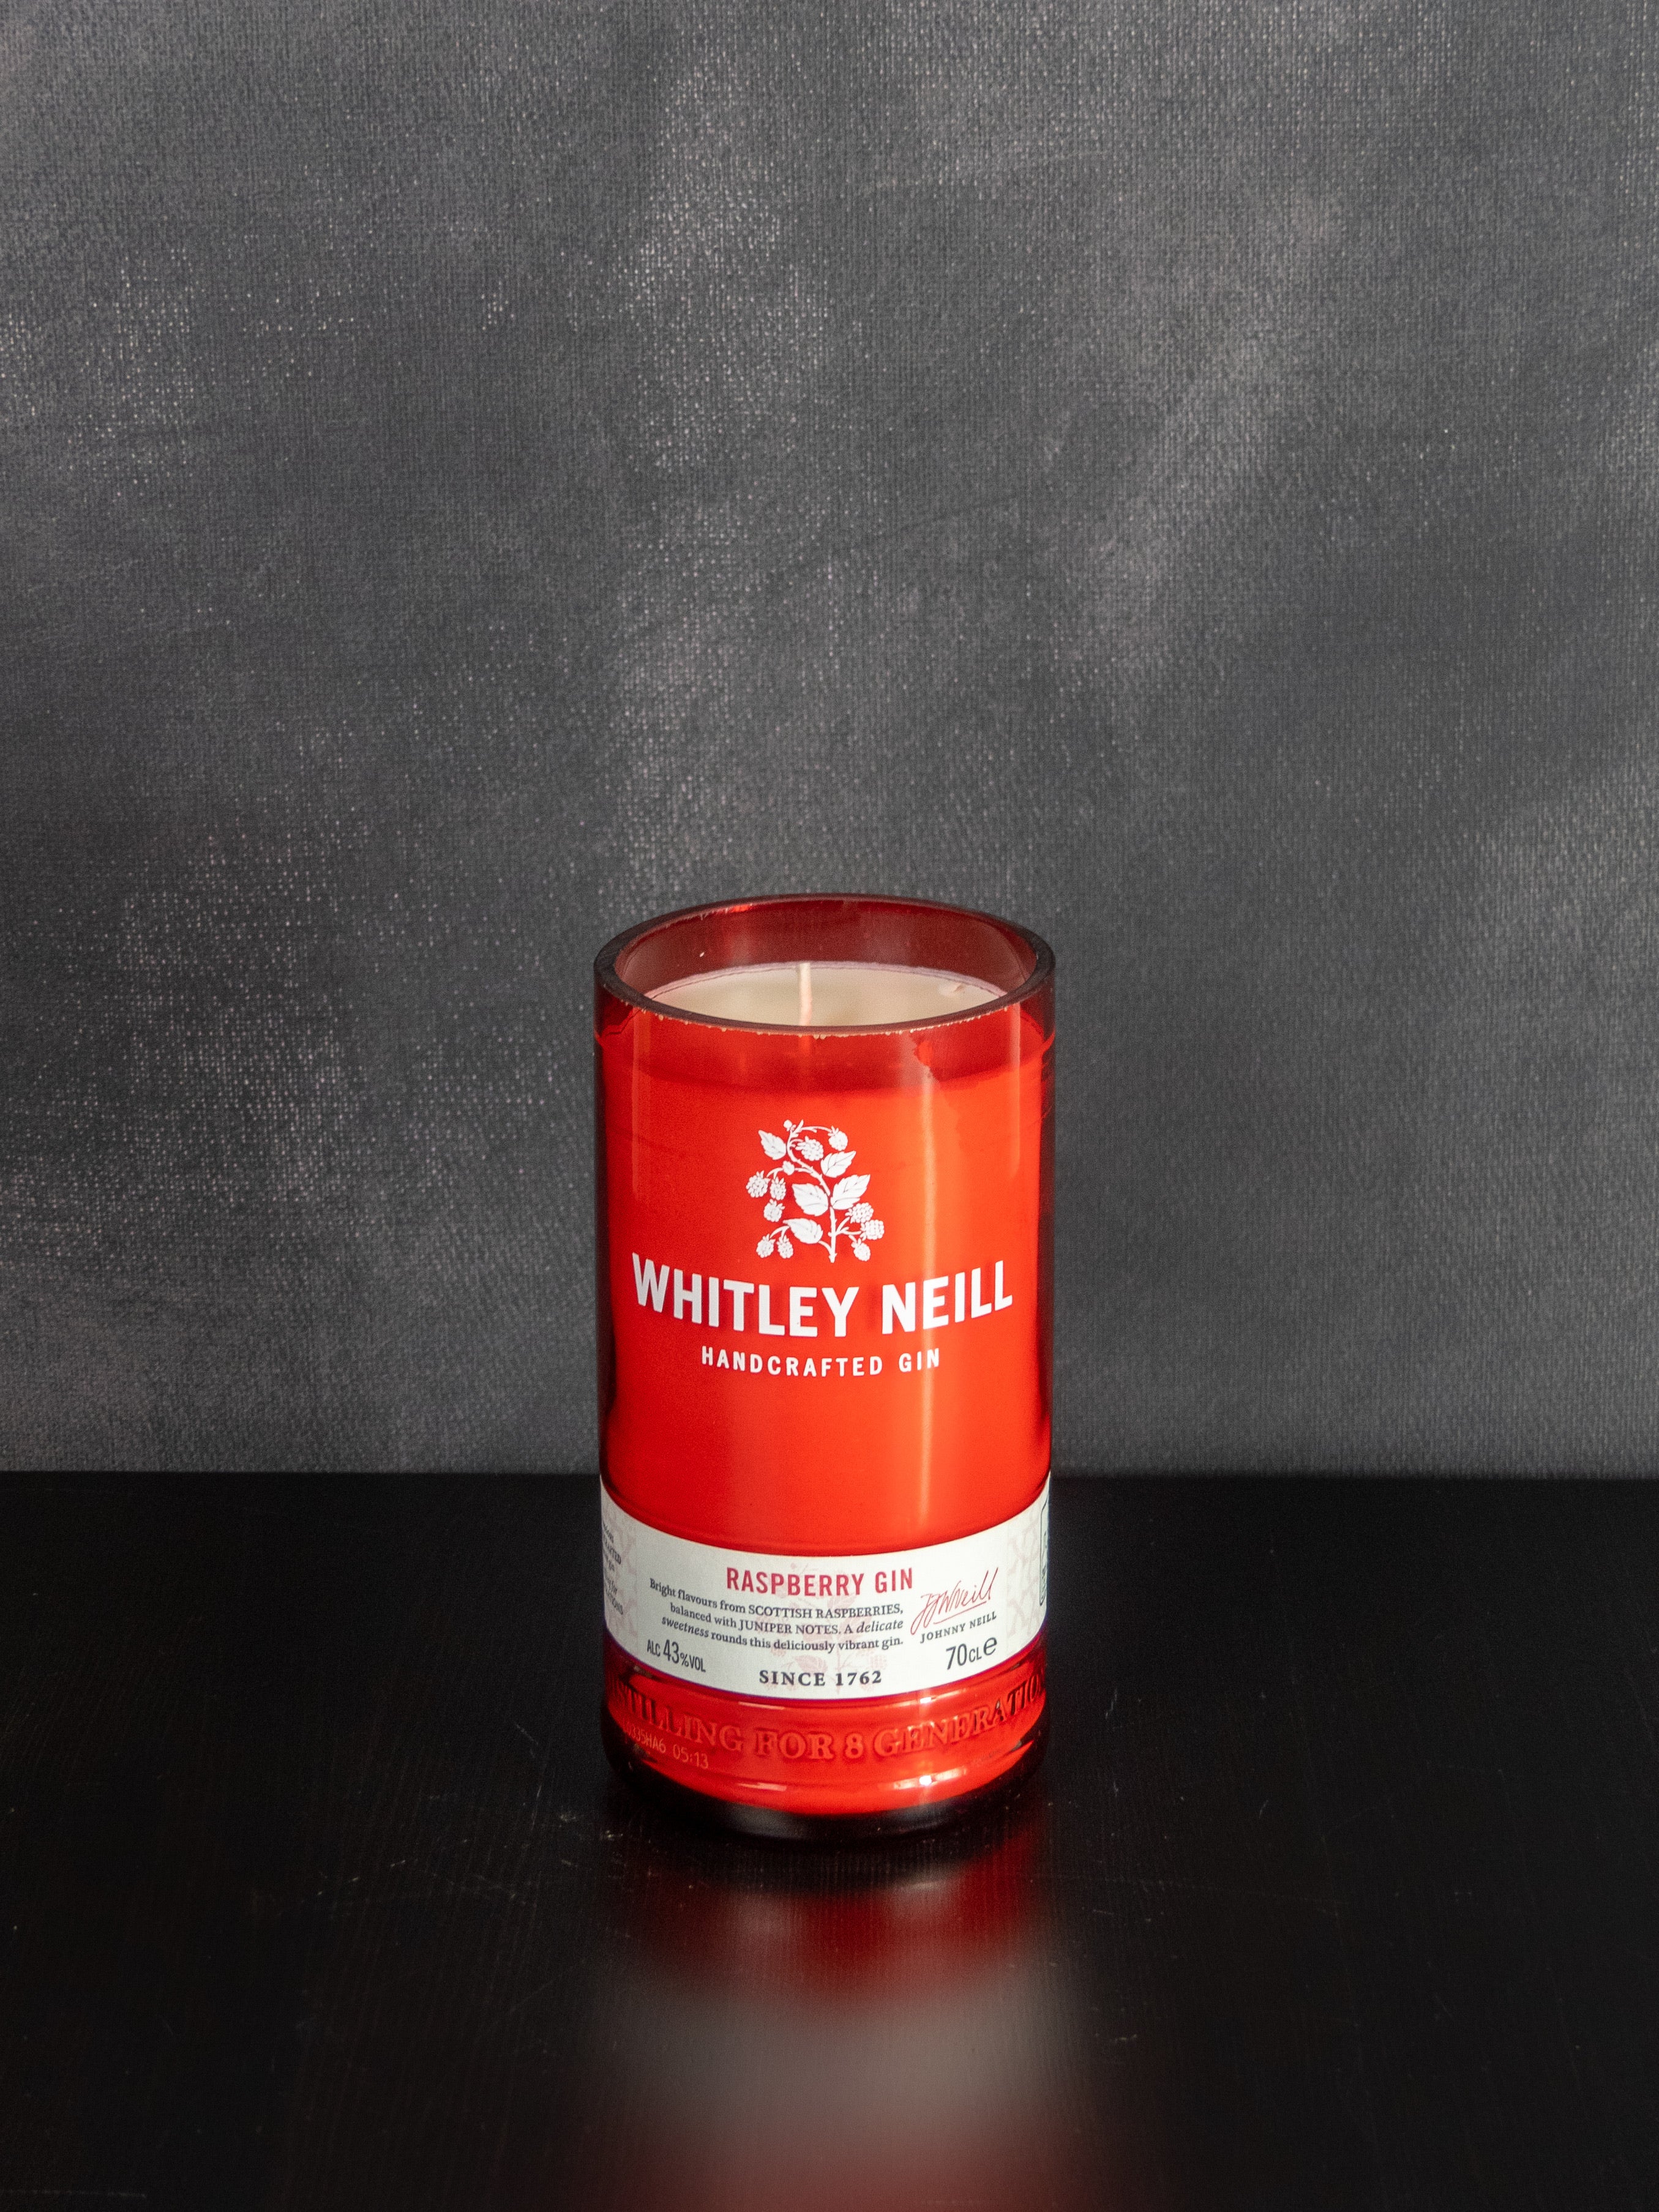 Whitley Neill Raspberry Gin Candle - Sweet Orange & Raspberry Scent